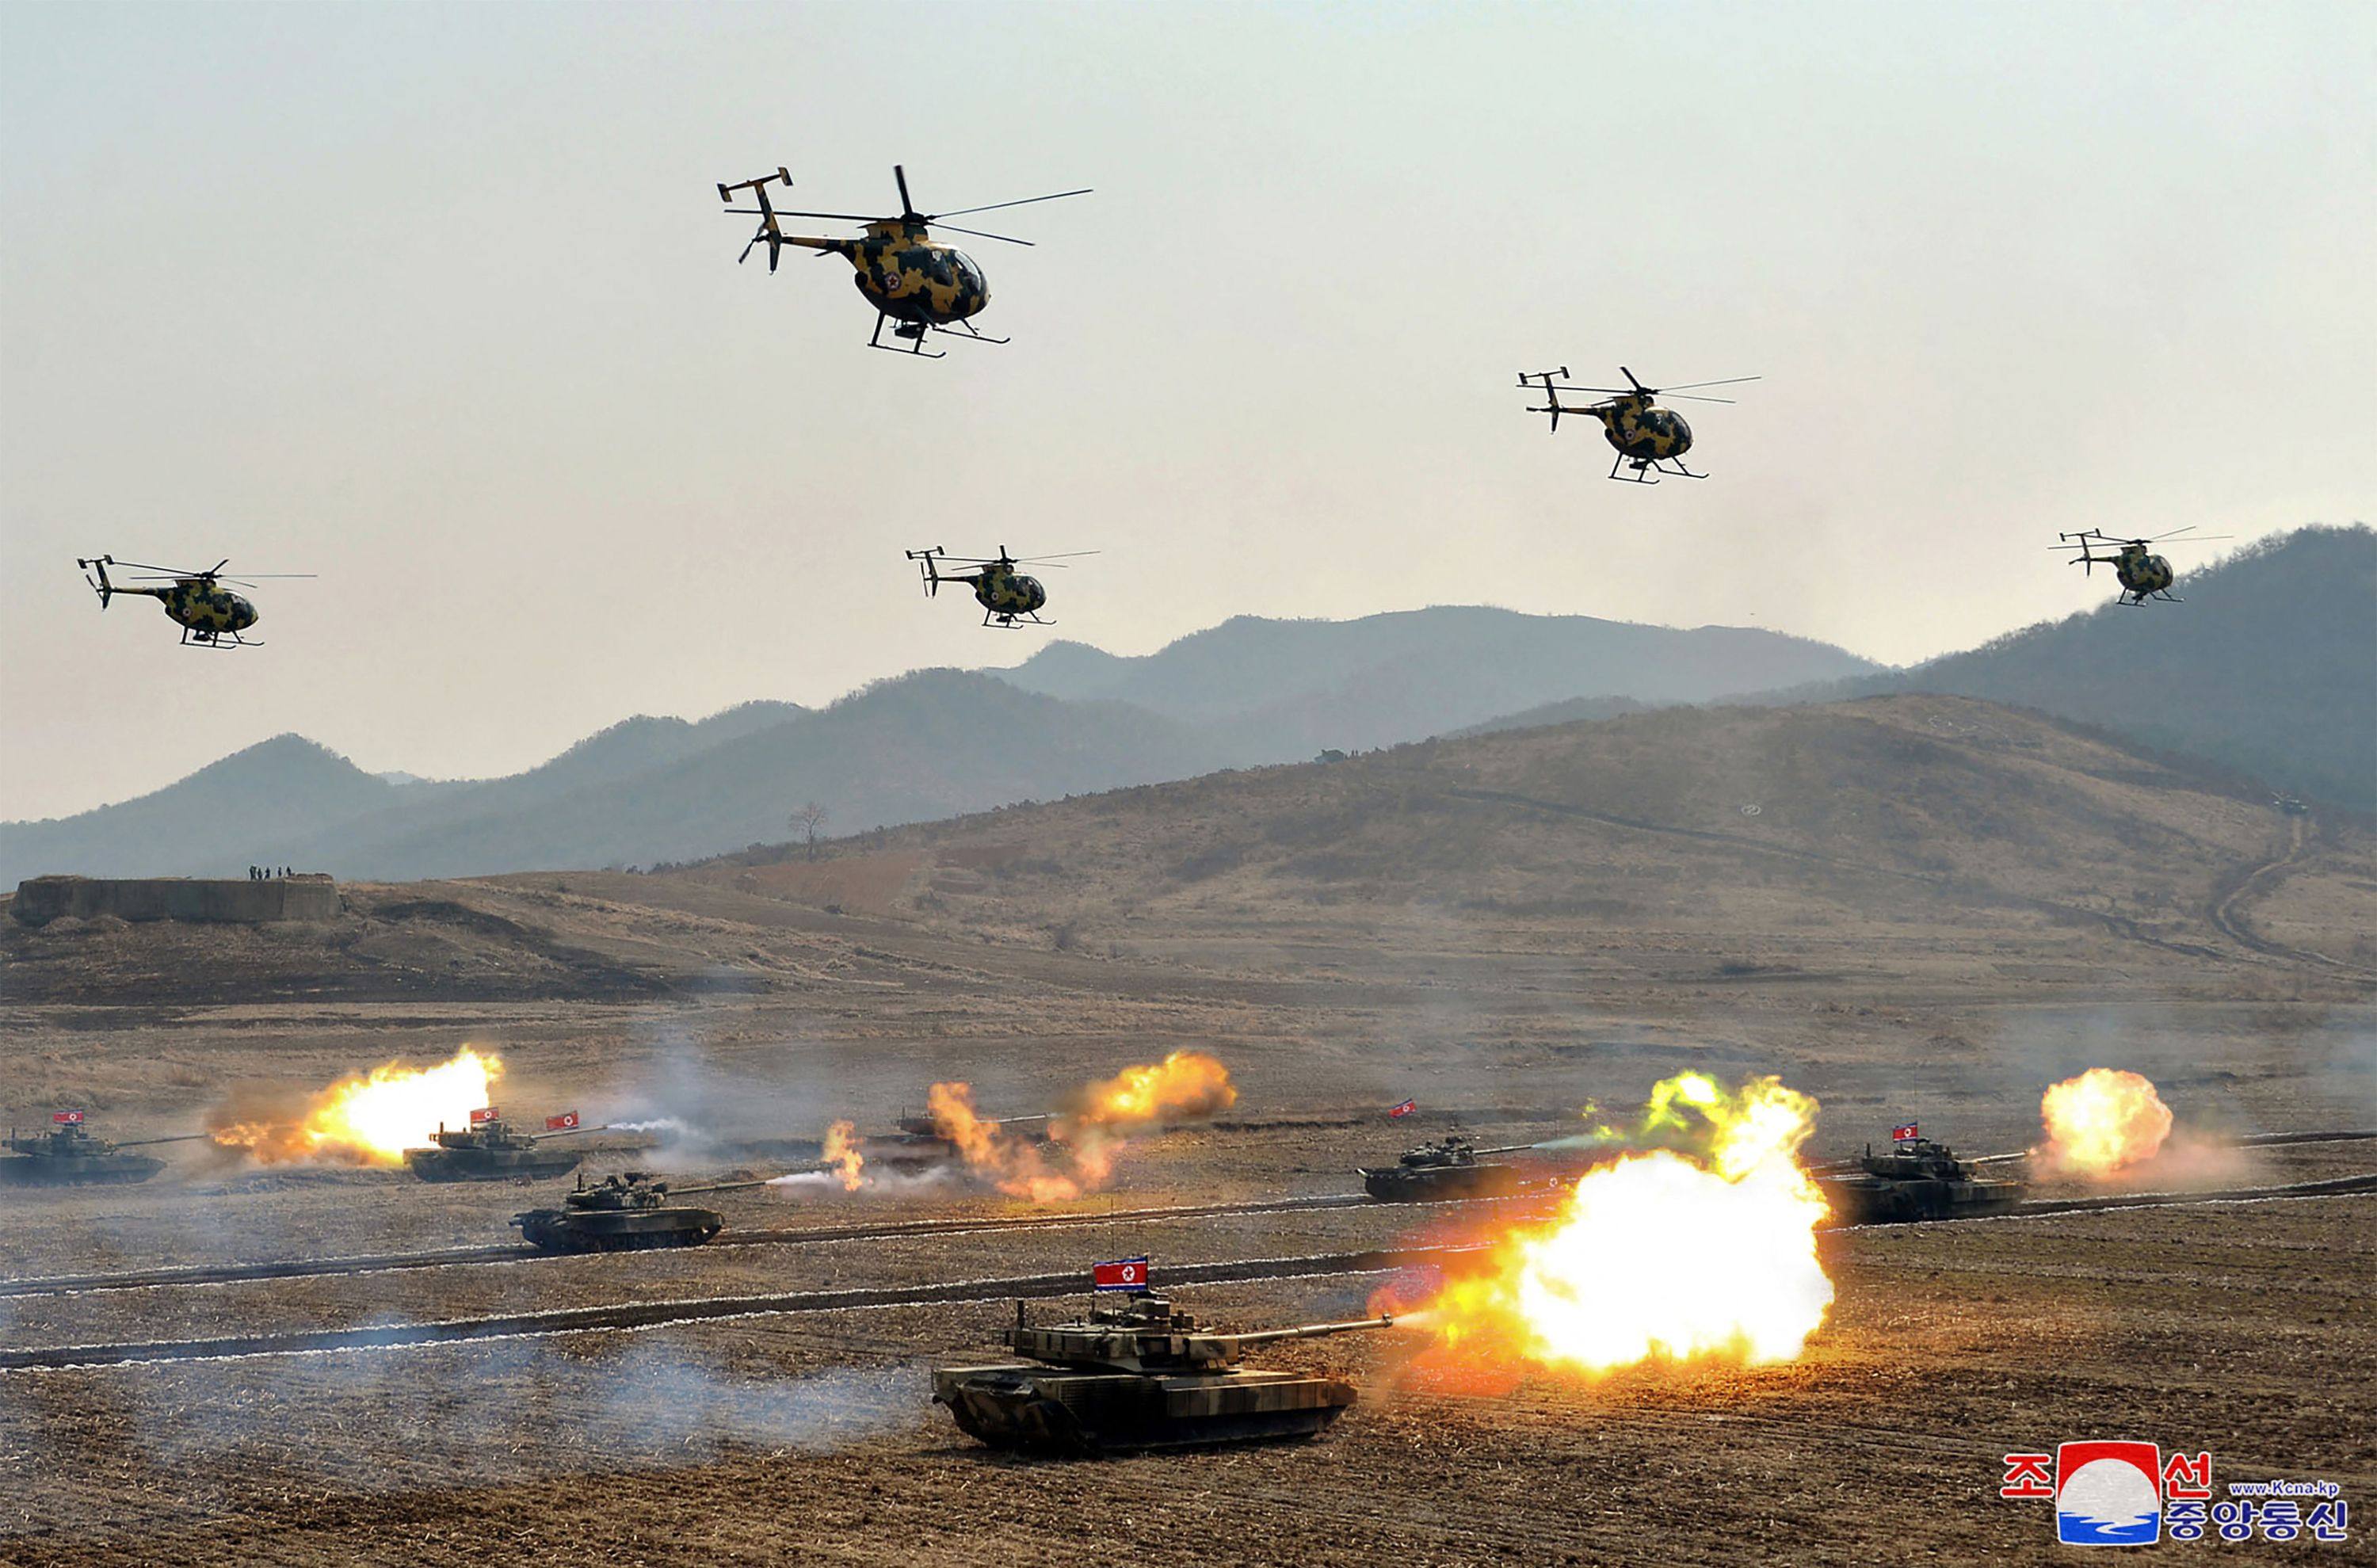 North Korean tank crews and helicopters conduct joint drills in an undisclosed location last month in this picture released by North Korea’s official Korean Central News Agency. Photo: KCNA via KNS / AFP